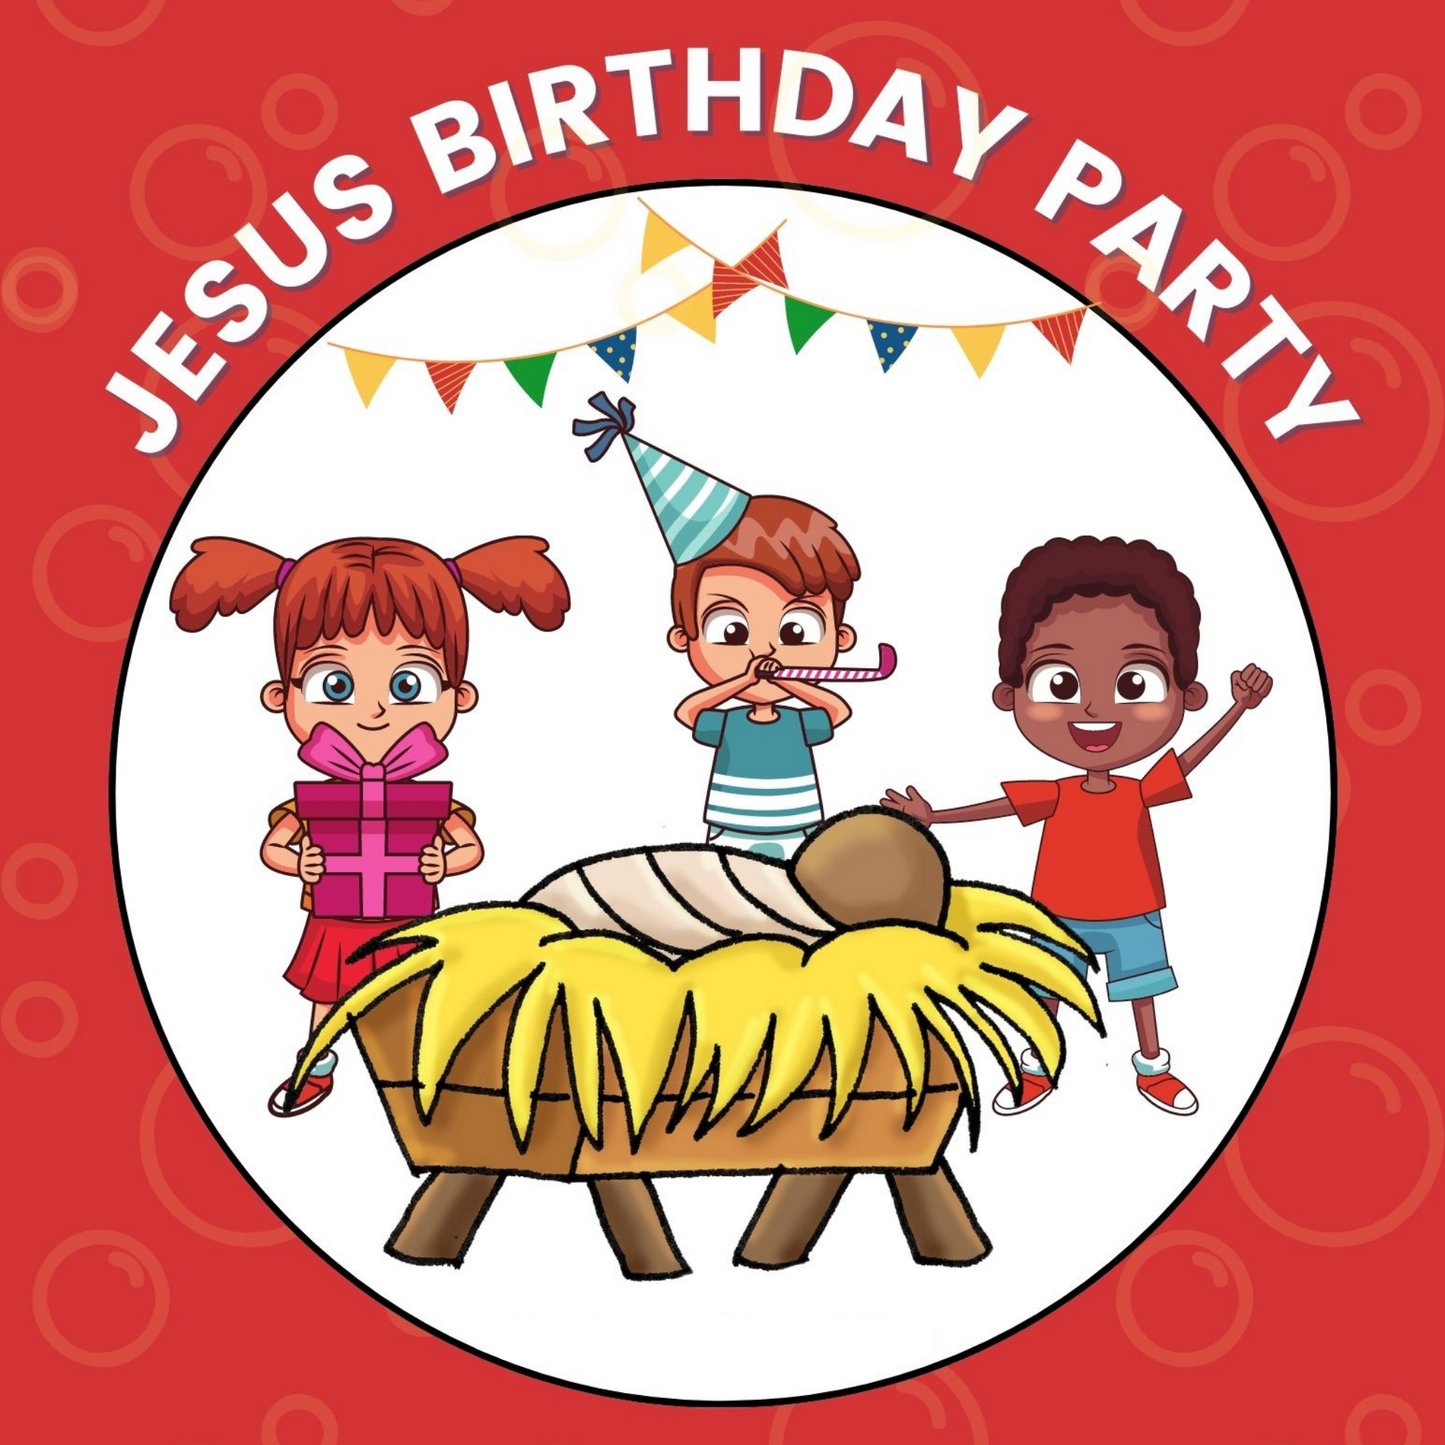 Jesus Birthday Party - Christmas Event for Church or Home